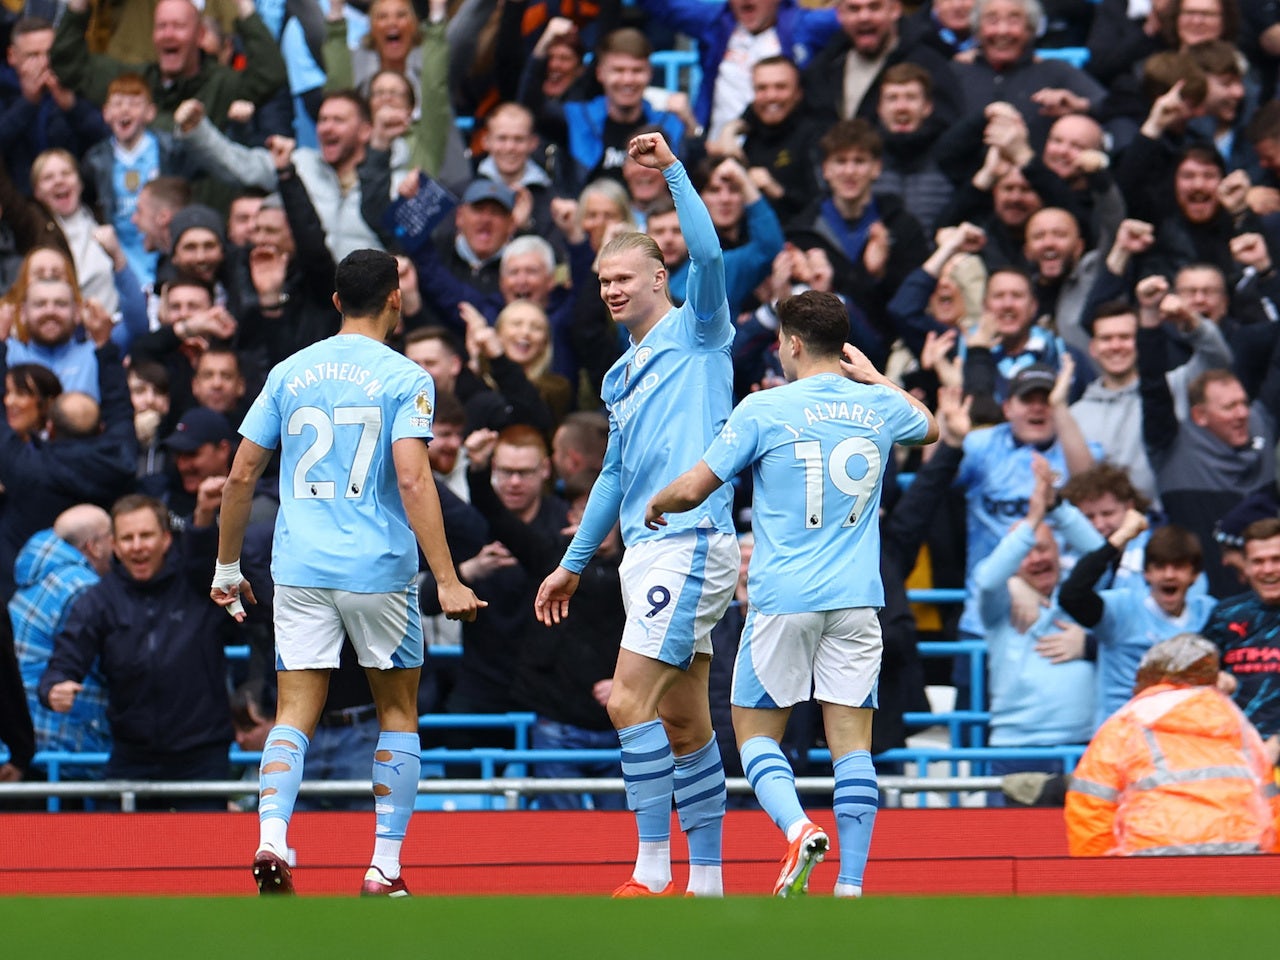 Manchester City move to Premier League summit with impressive home win over Luton